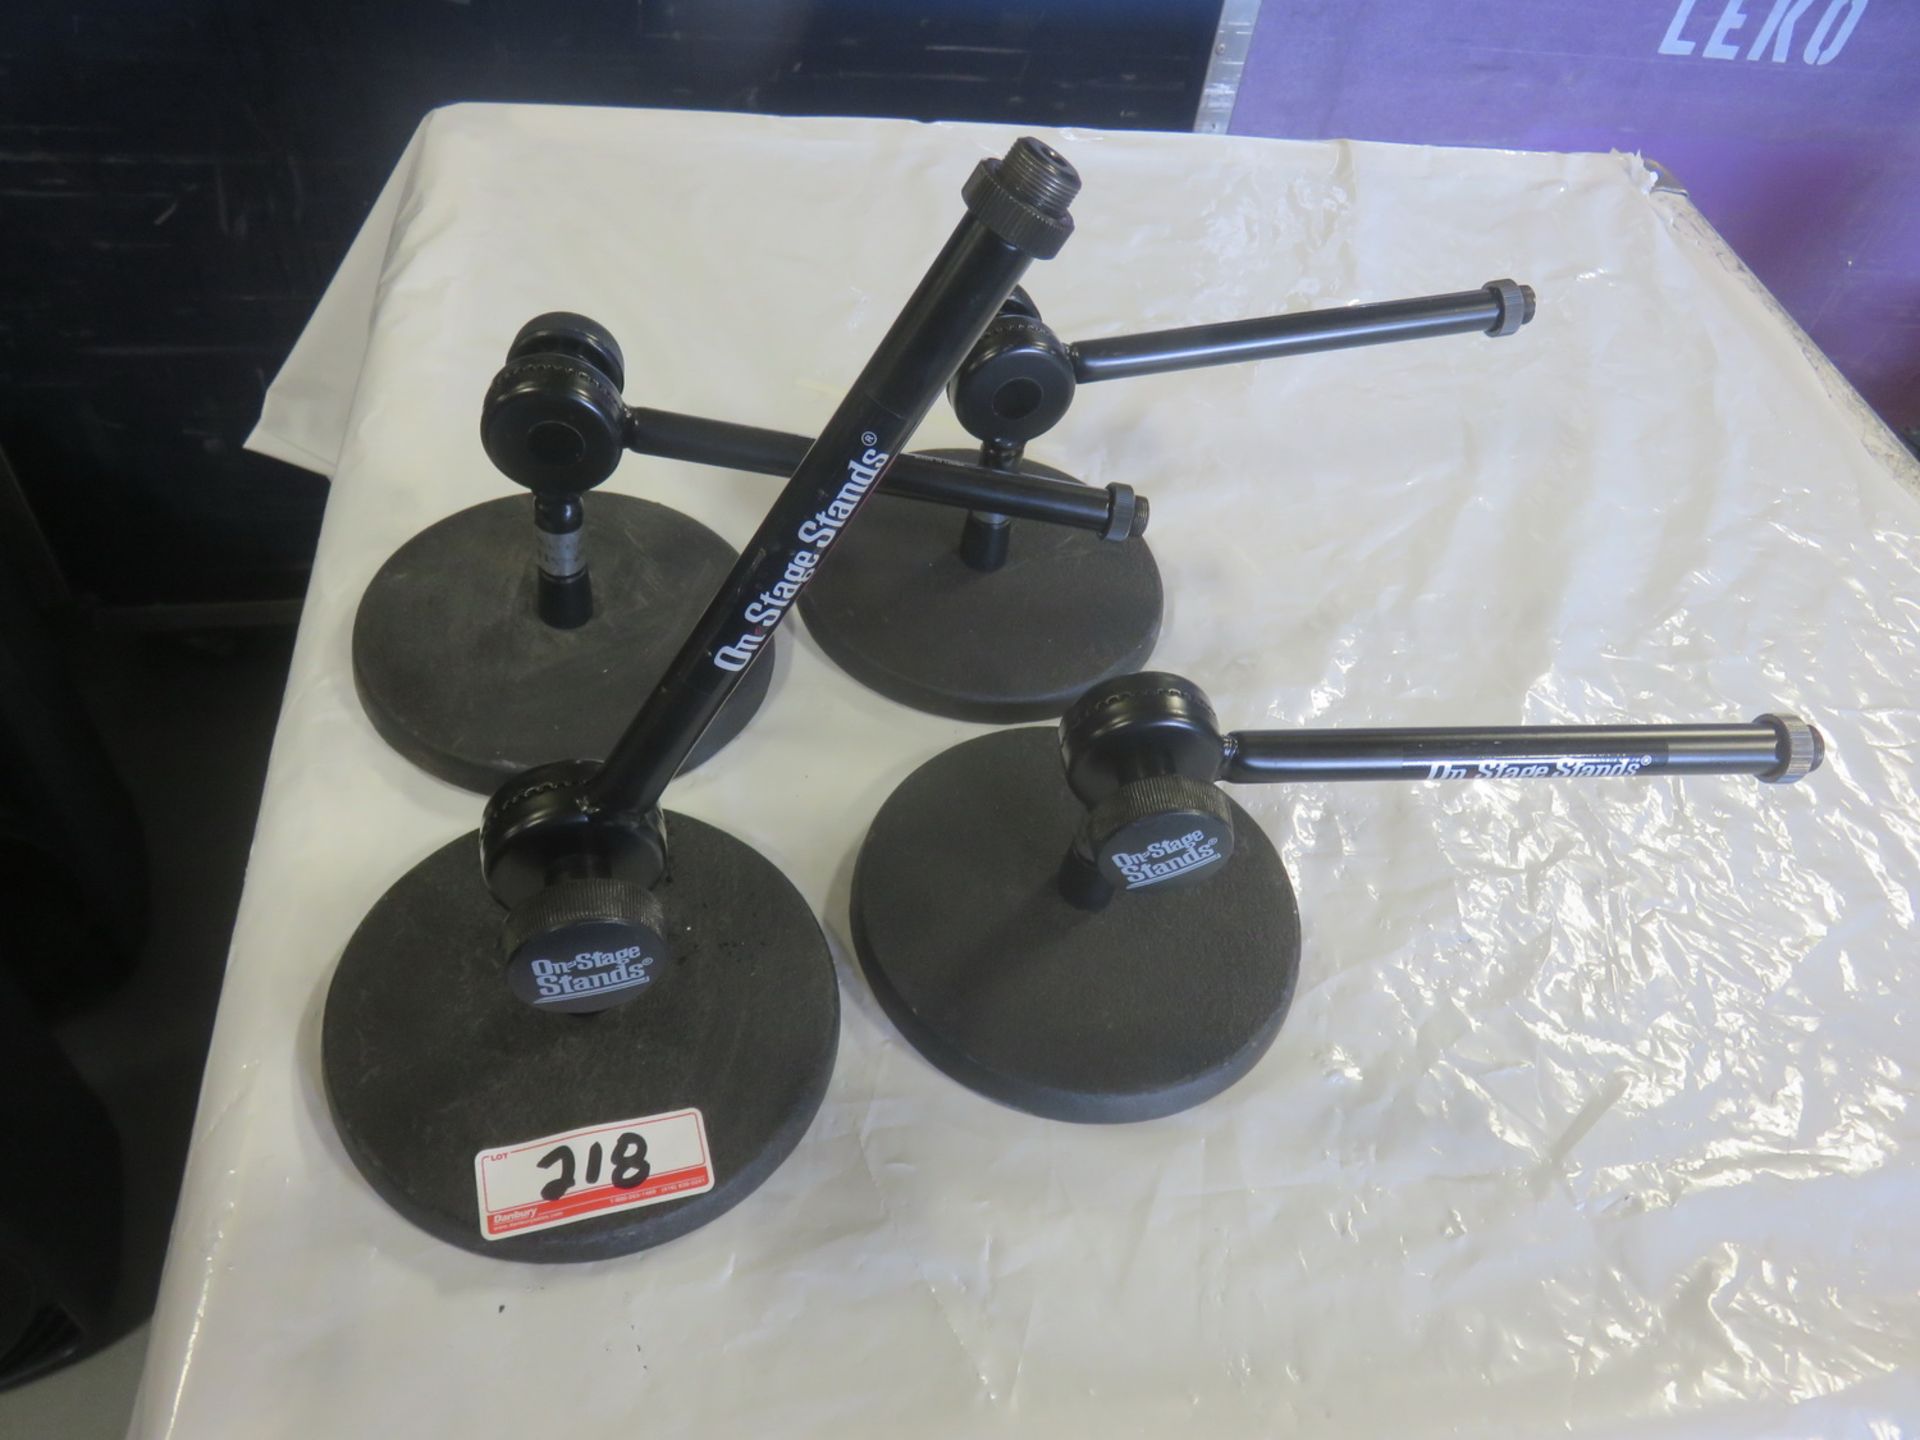 LOT - ON STAGE TABLE MIC STANDS (4 UNITS)